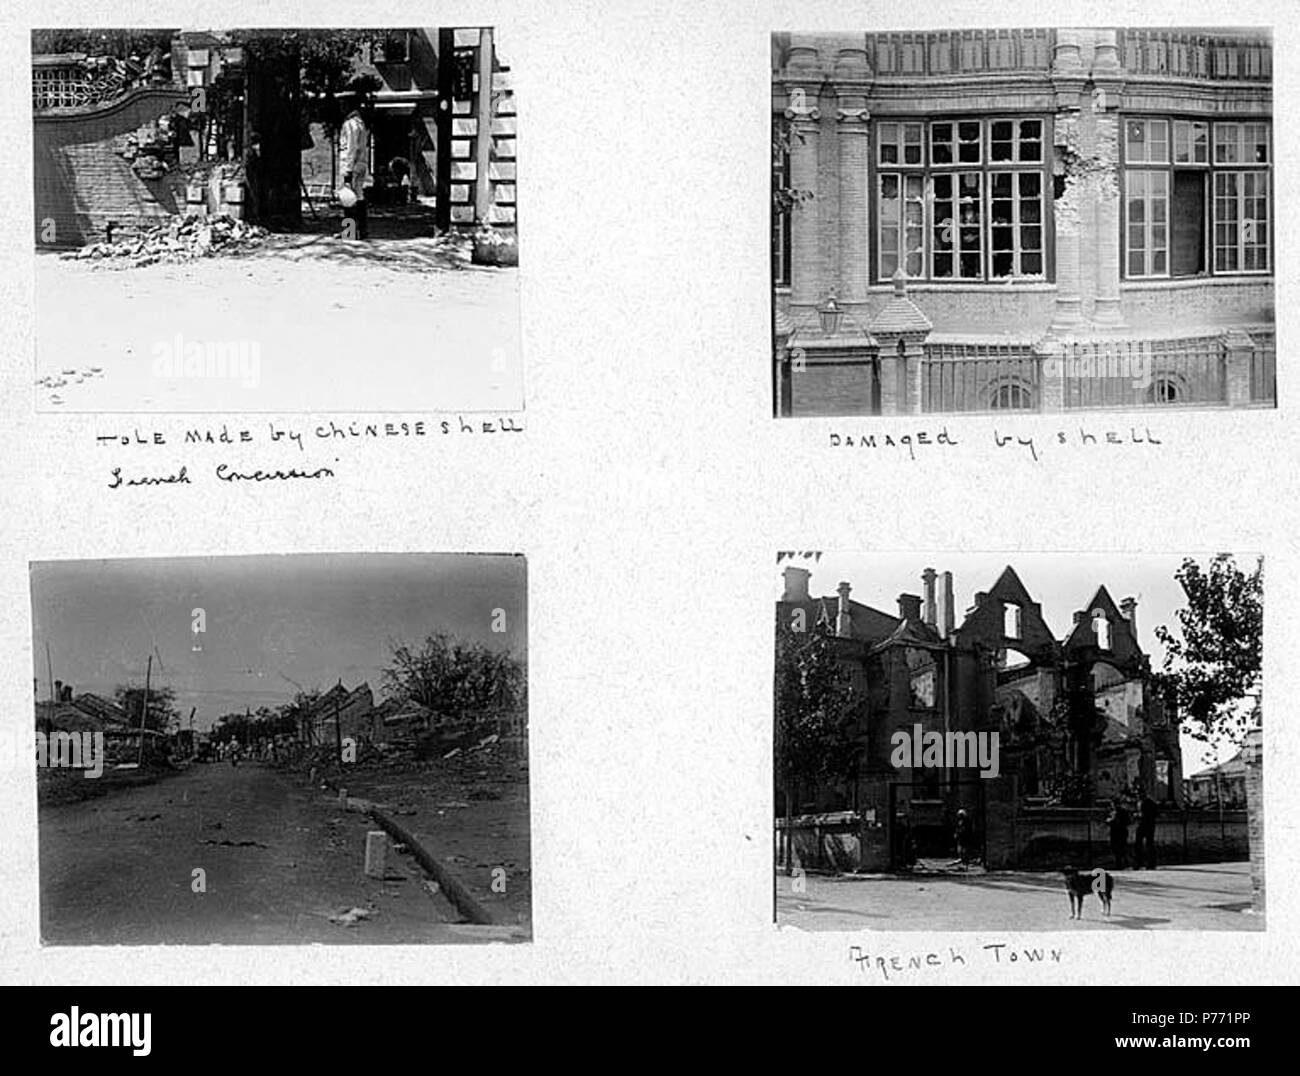 . English: 7.14 Aftermath of Boxer Rebellion, ca. 1899-1905 . English: Captions on album page: Hole made by Chinese shell; French Concession (); Damaged by shell; French town . PH Coll 241.B14a-d Subjects (LCTGM): War damage--China Subjects (LCSH): China--History--Boxer Rebellion, 1899-1901--Destruction and pillage; China--History--Boxer Rebellion, 1899-1901--Destruction and pillage; Buildings--War damage--China  . circa 1899-1905 1 714 Aftermath of Boxer Rebellion, ca 1899-1905 (CHANDLESS 10) Stock Photo